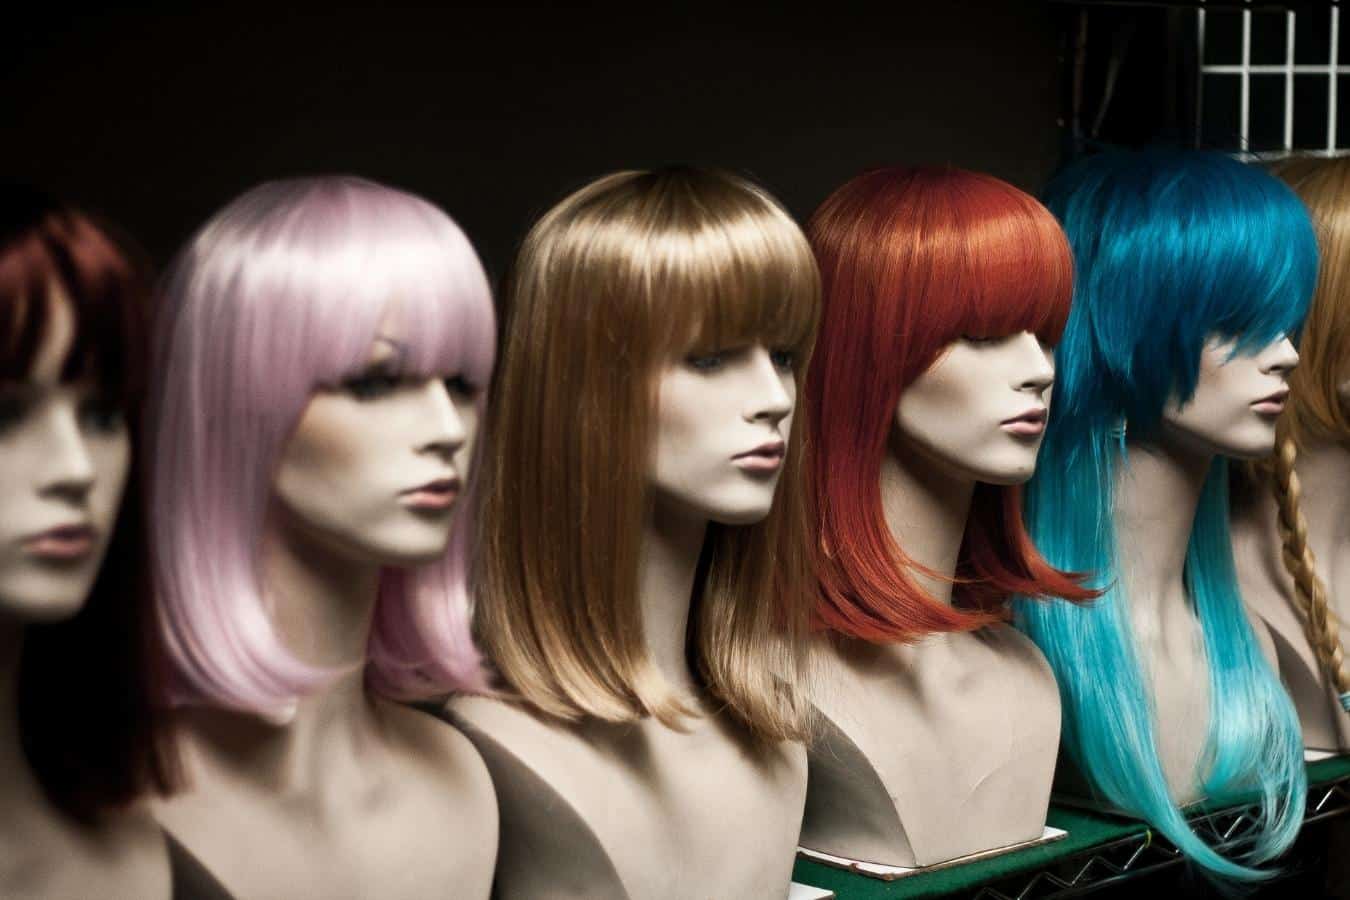 mannequins on a row with wigs on them